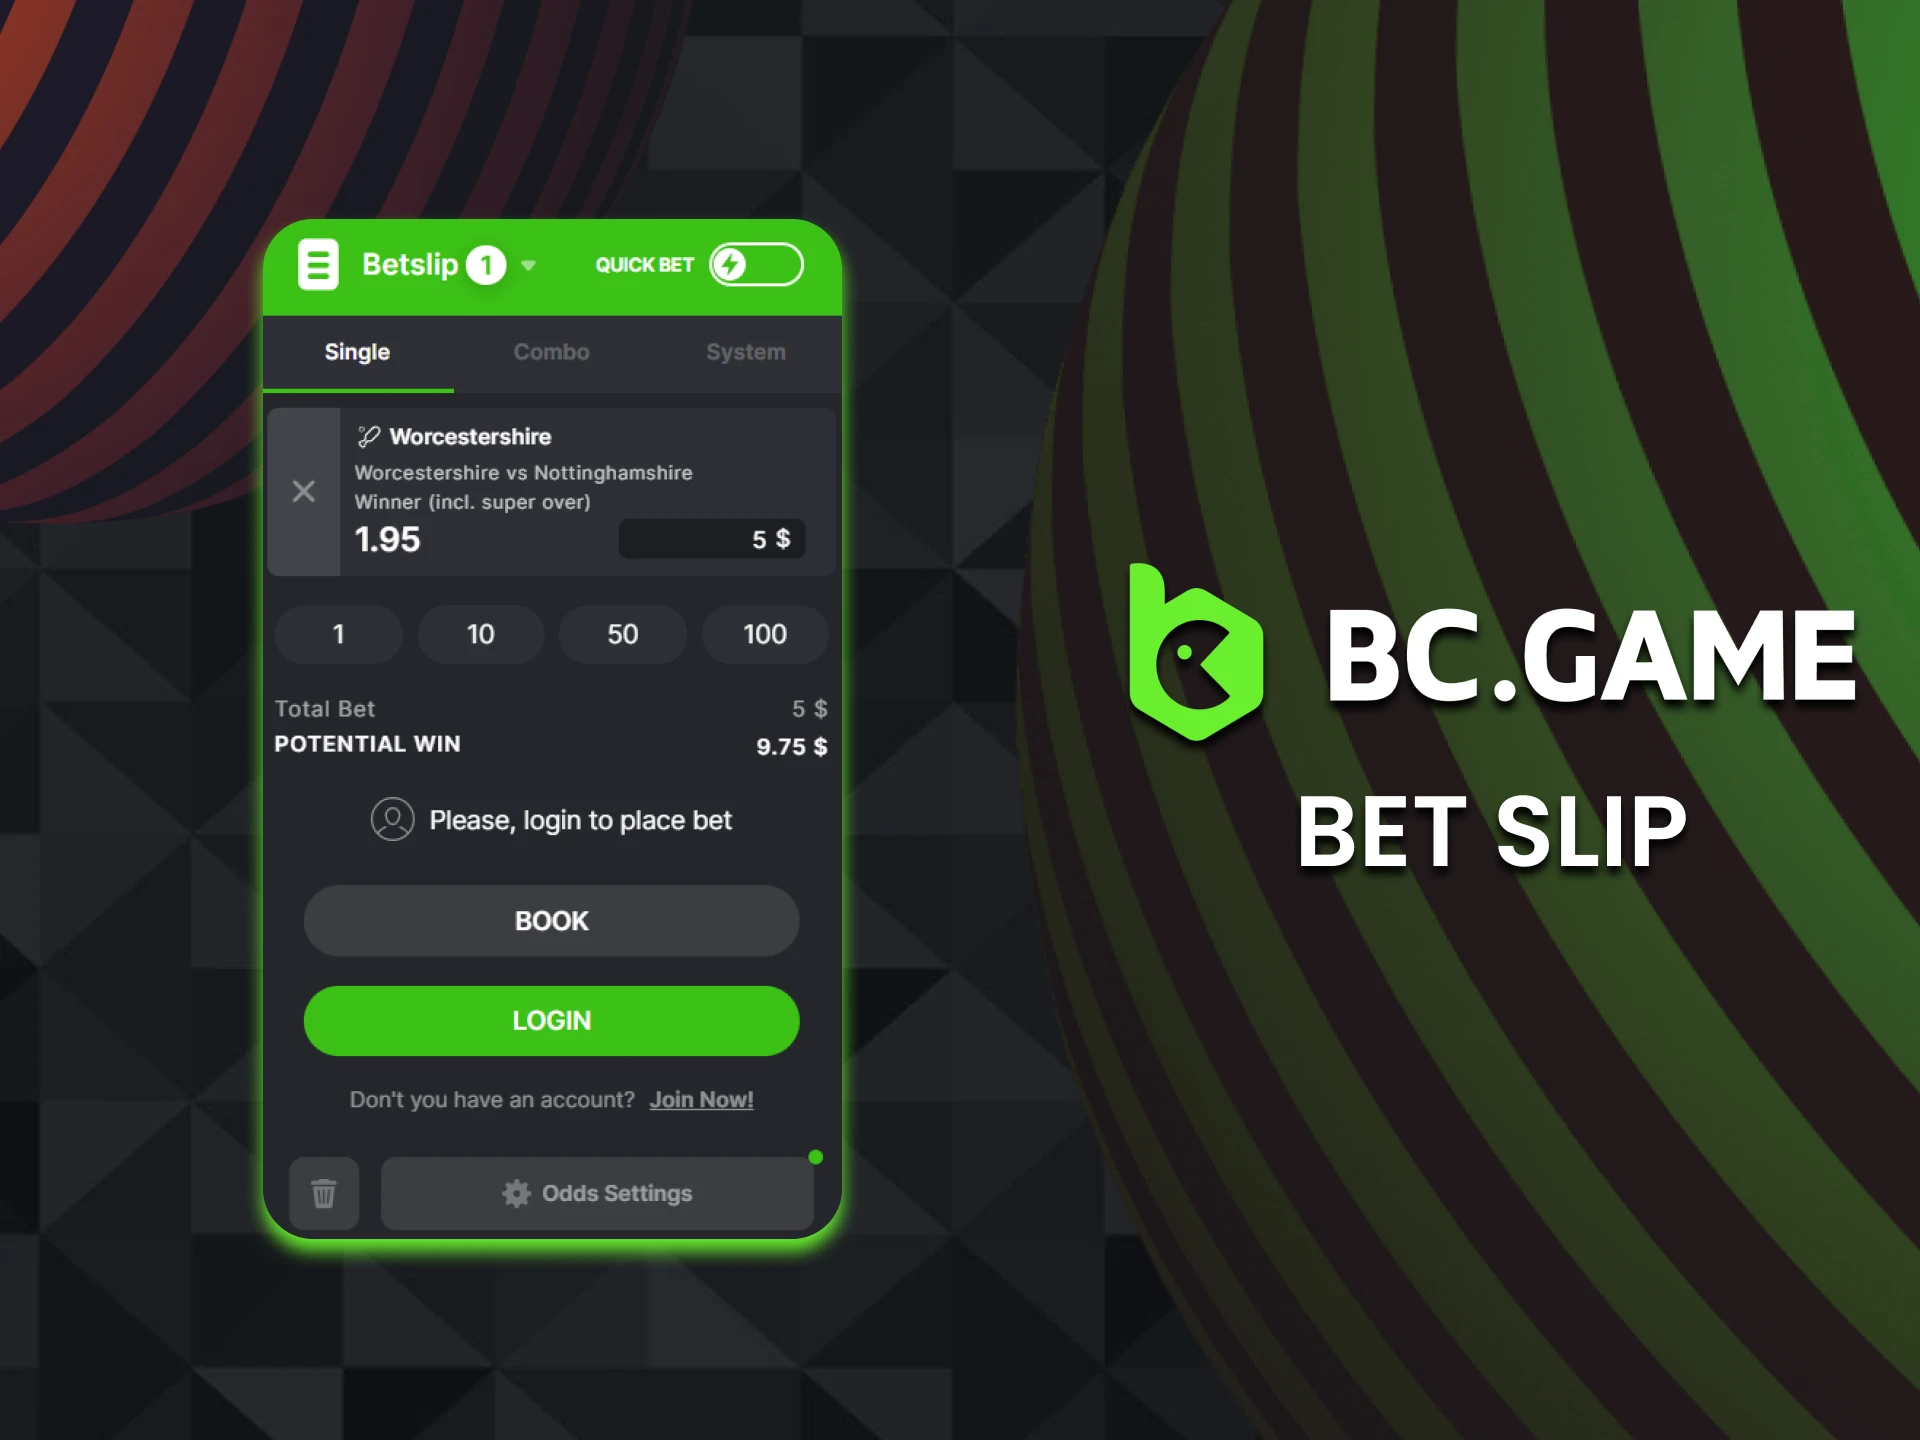 Try bet slip option on the BC Game.